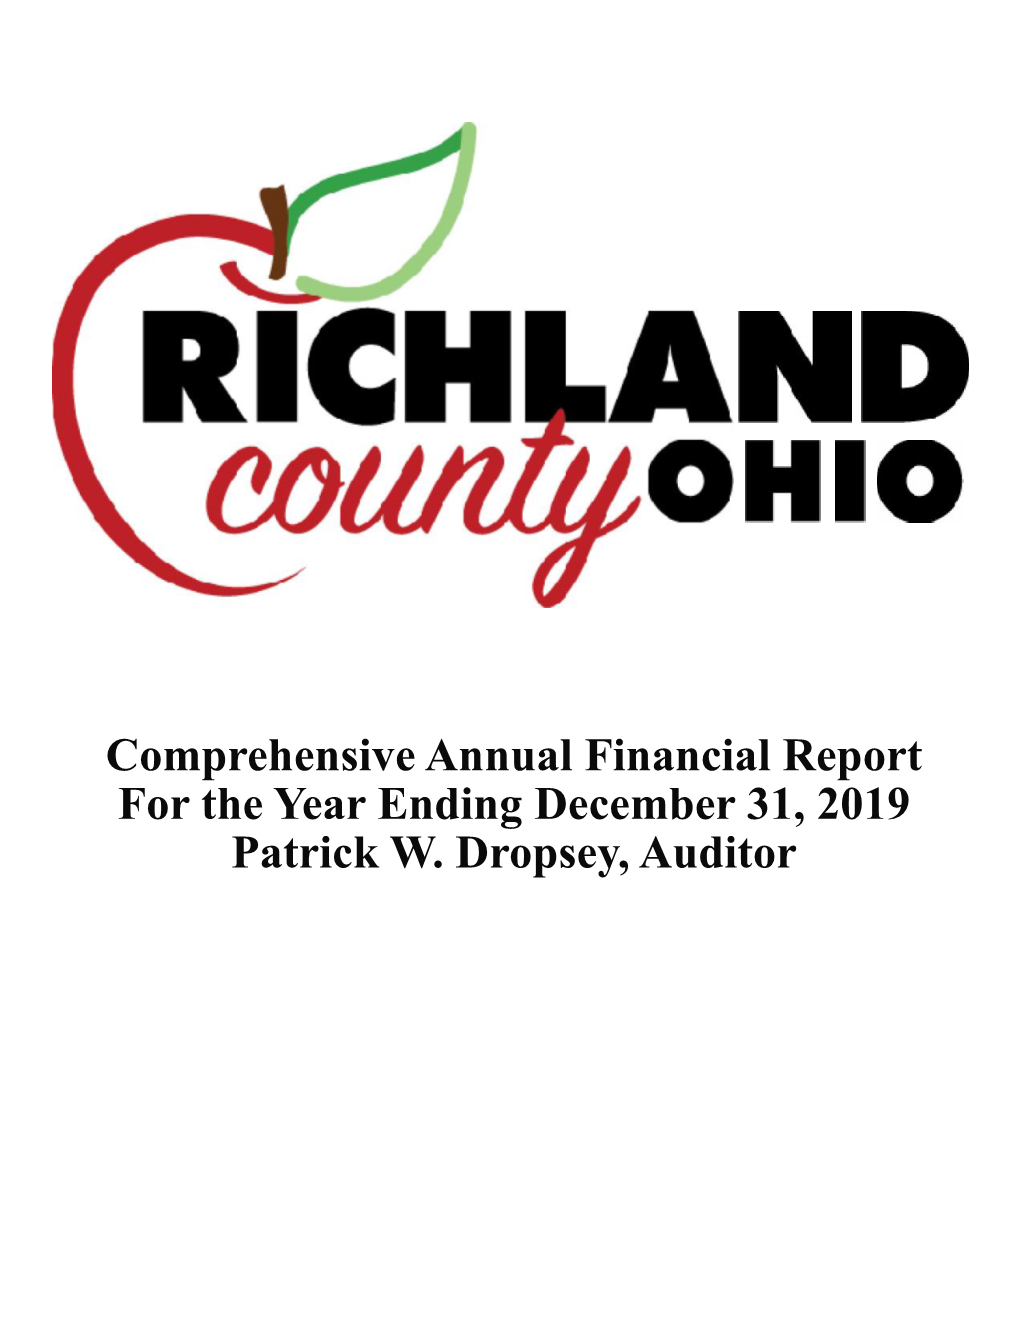 Comprehensive Annual Financial Report for the Year Ending December 31, 2019 Patrick W